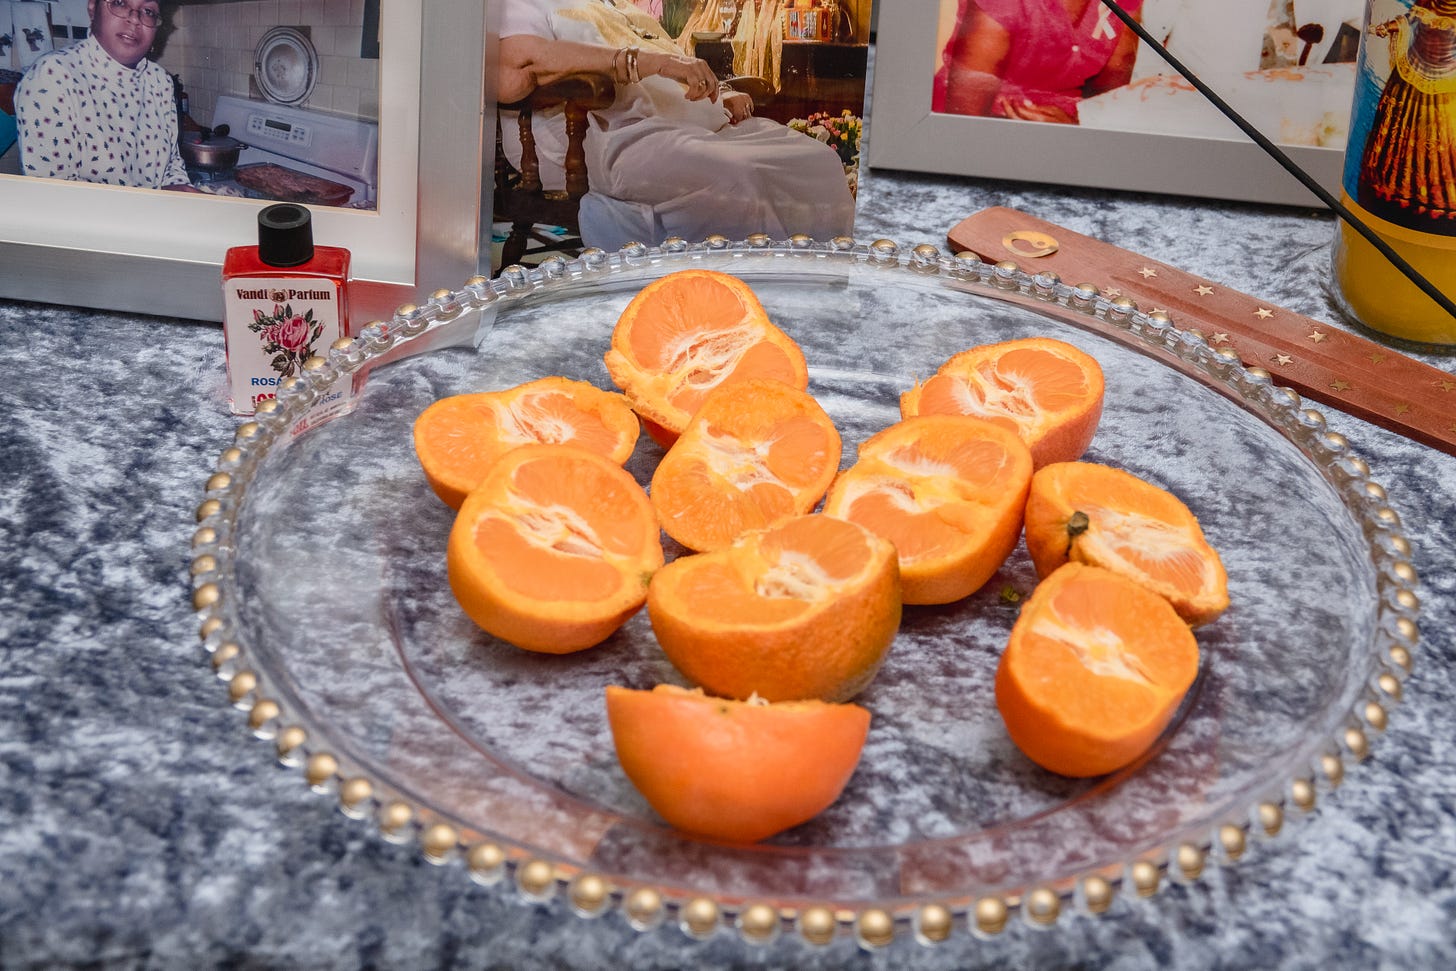 Sliced oranges, rose oil, incence on a table with a blue table cloth